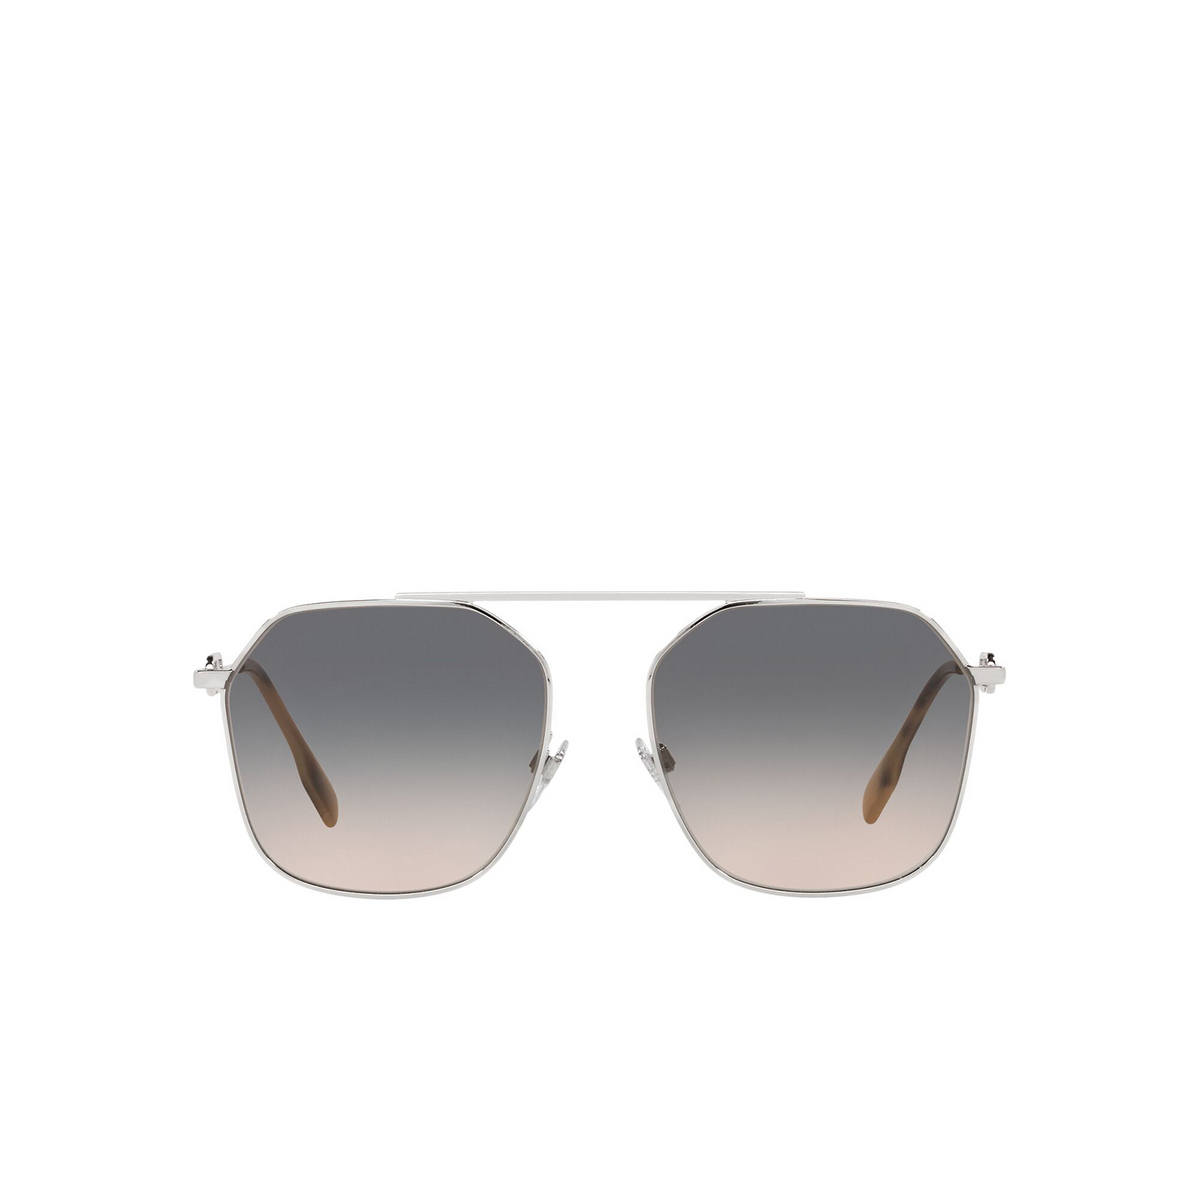 Burberry® Square Sunglasses: Emma BE3124 color Silver 1005G9 - front view.